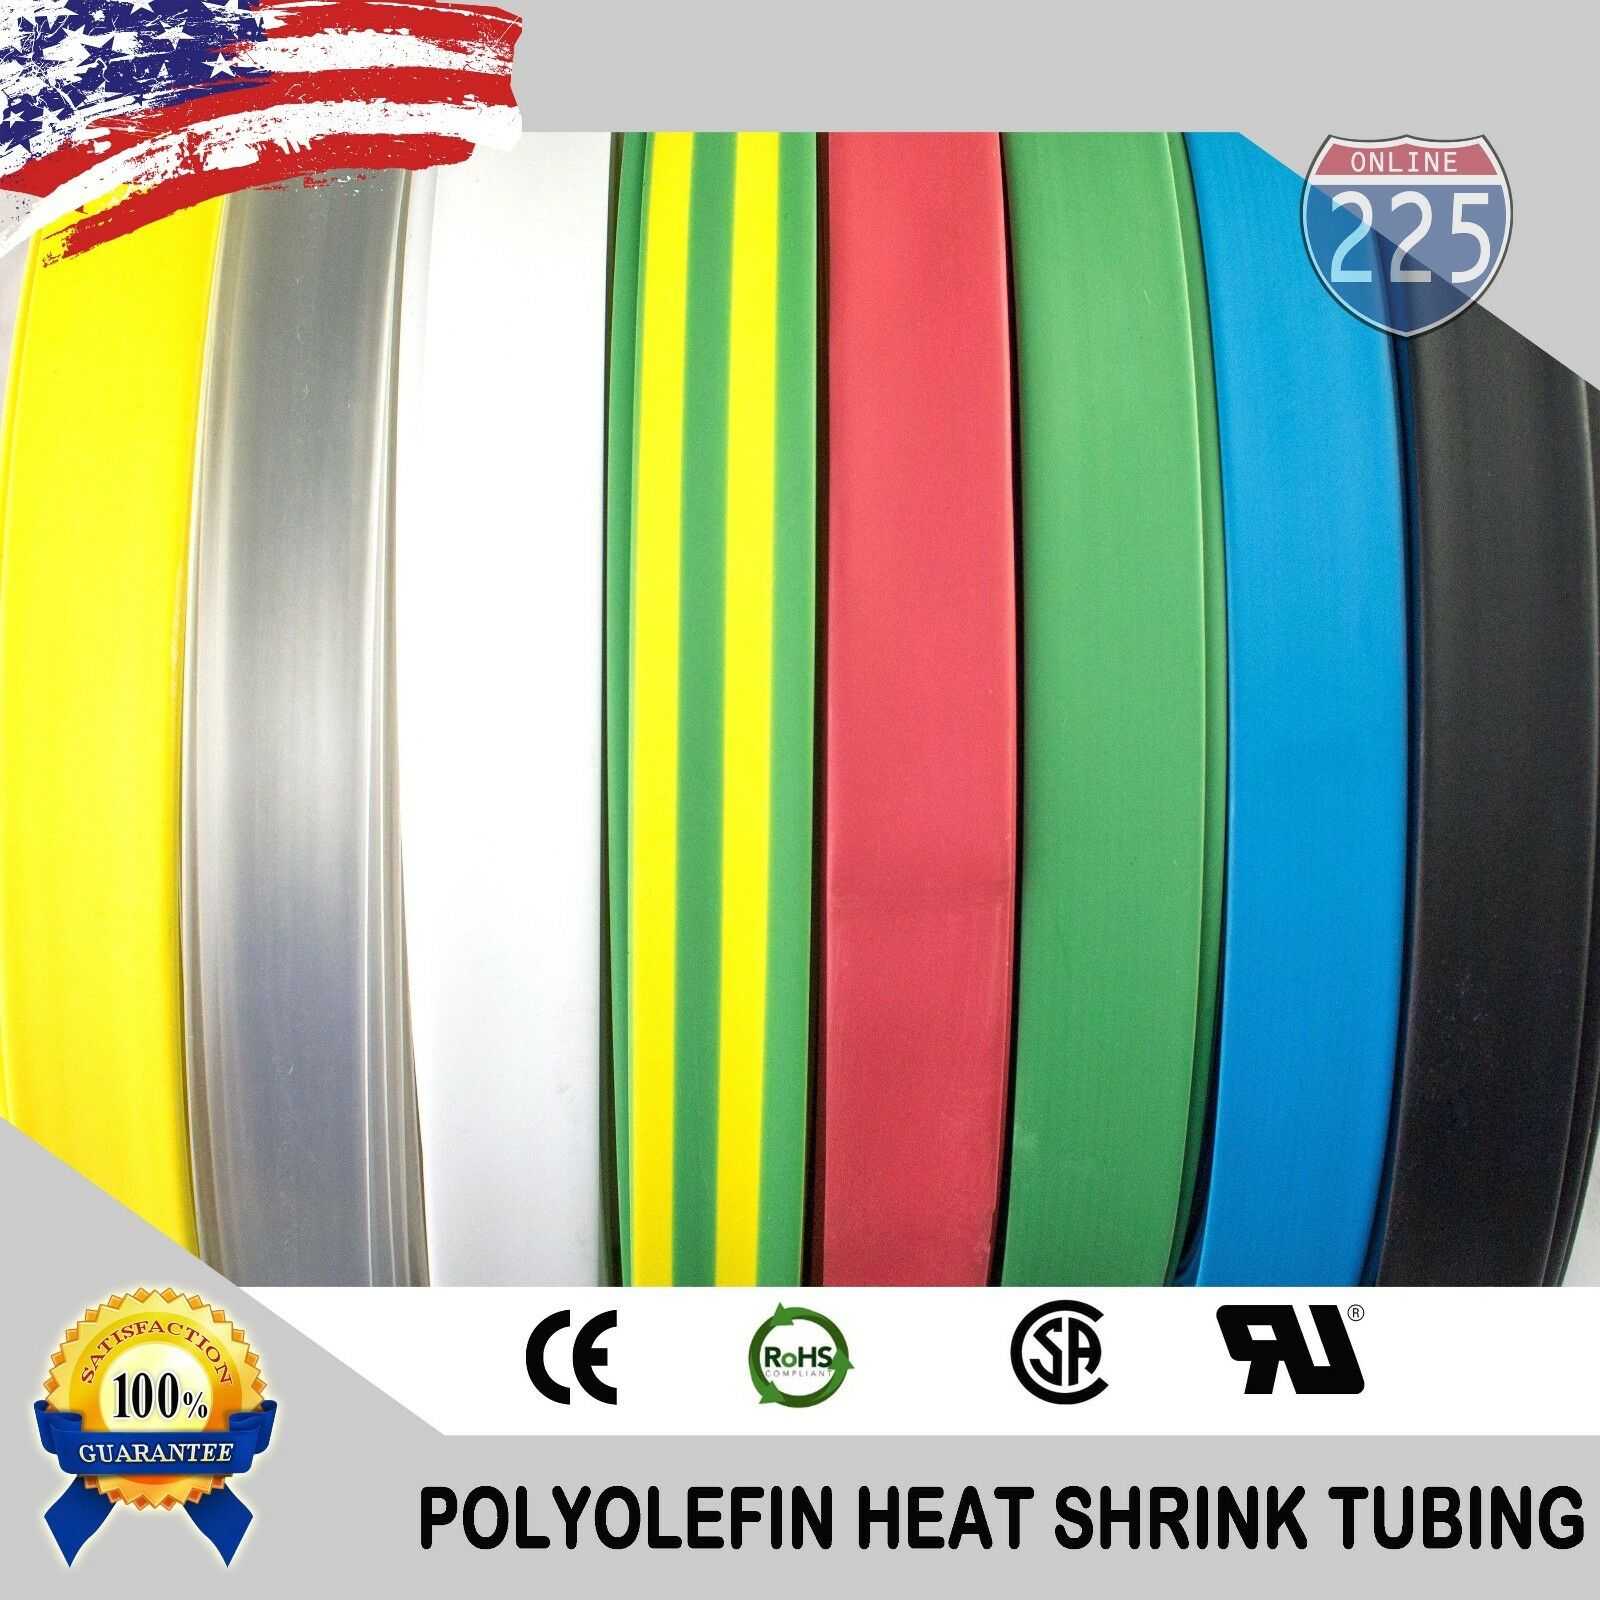 All Sizes & Colors 25 - 100 Ft Polyolefin 2:1 Heat Shrink Tubing Sleeving Us Lot